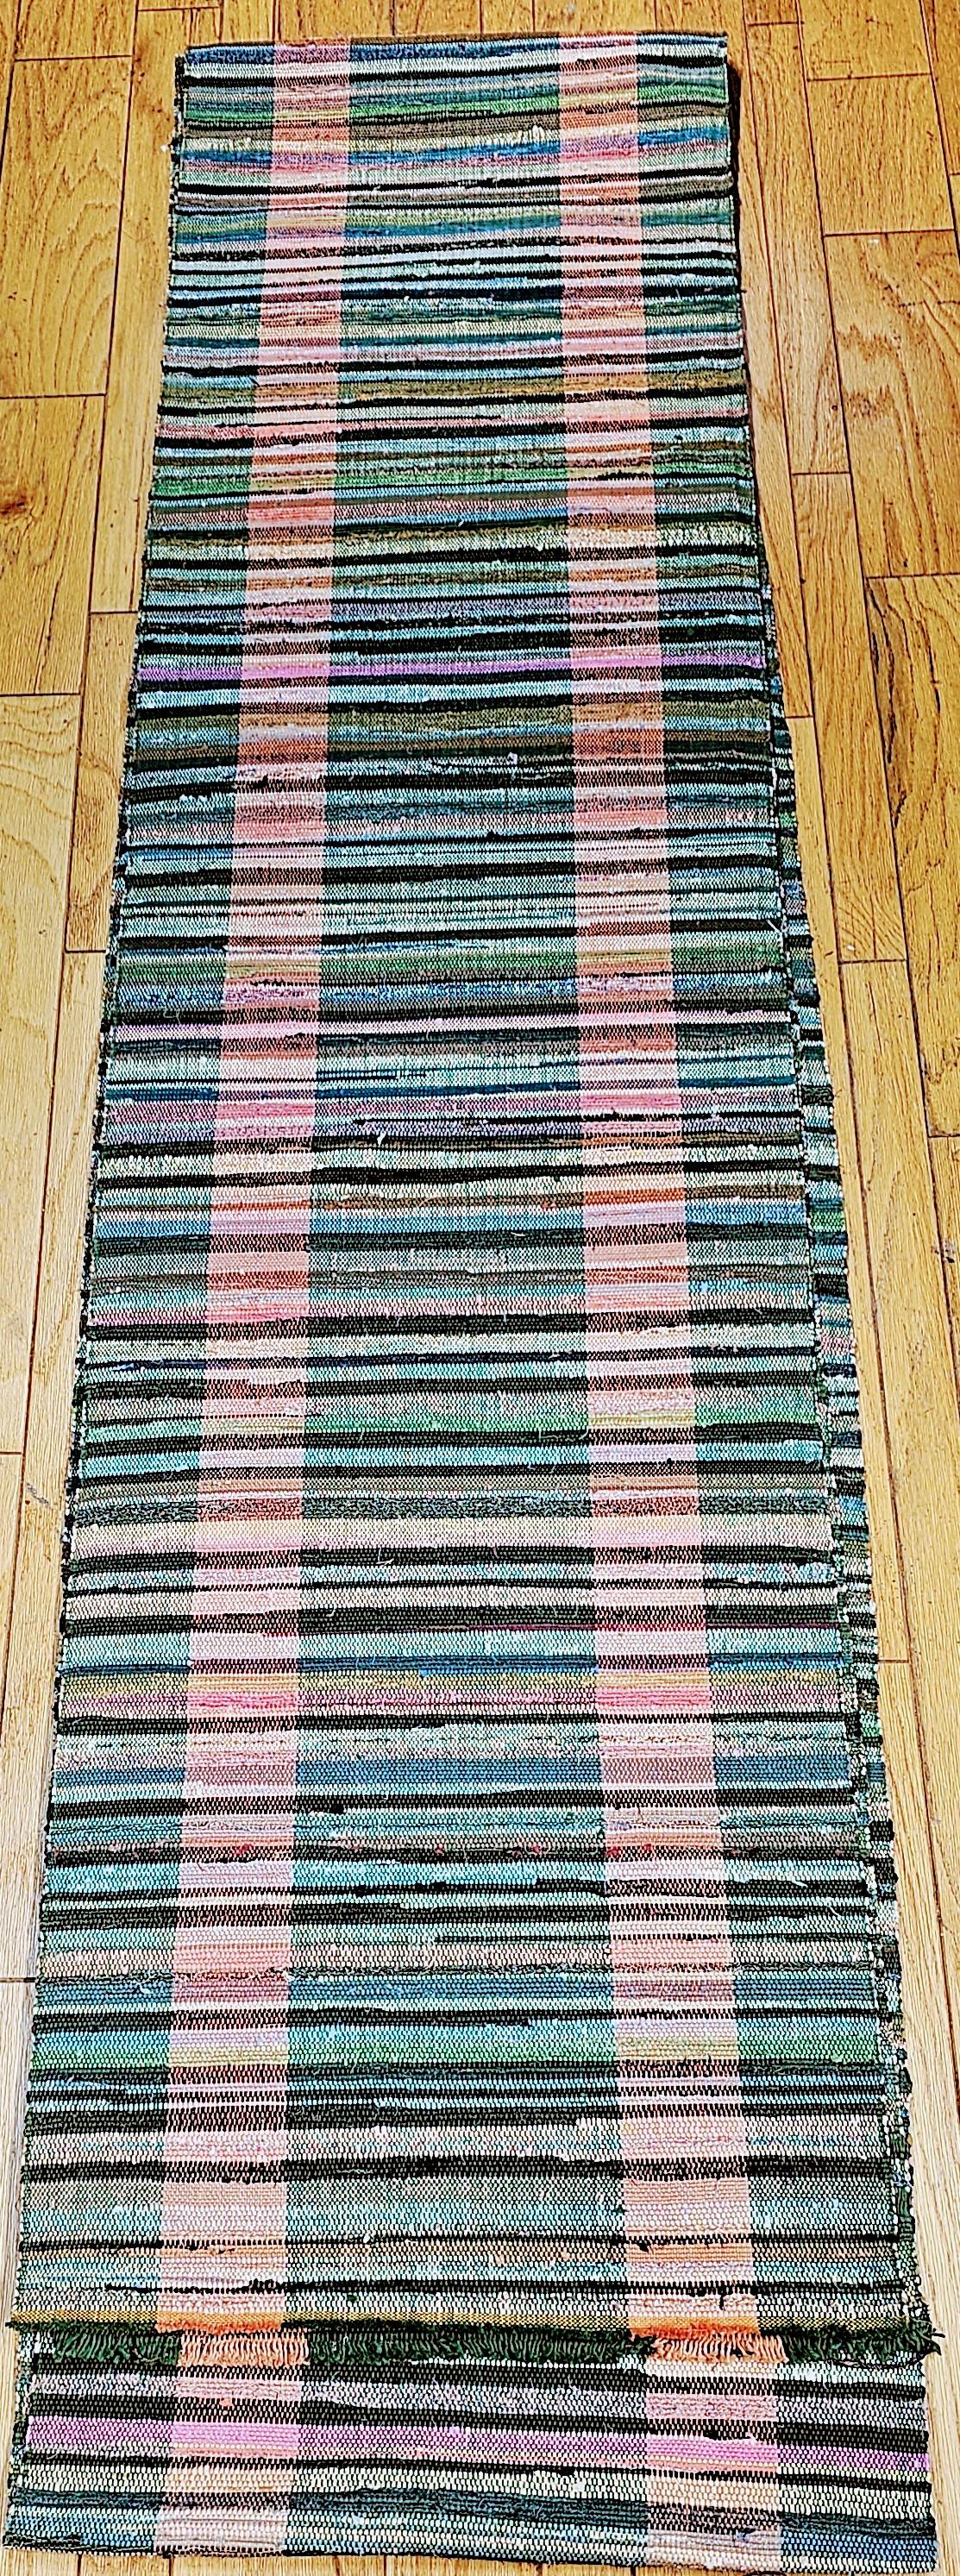 Vintage American rag runner has a green color field and two sets of stripes in beautiful pink color variations. Custom resizing service is available for this item upon request.  The long rag runner can be custom made into various size runners and